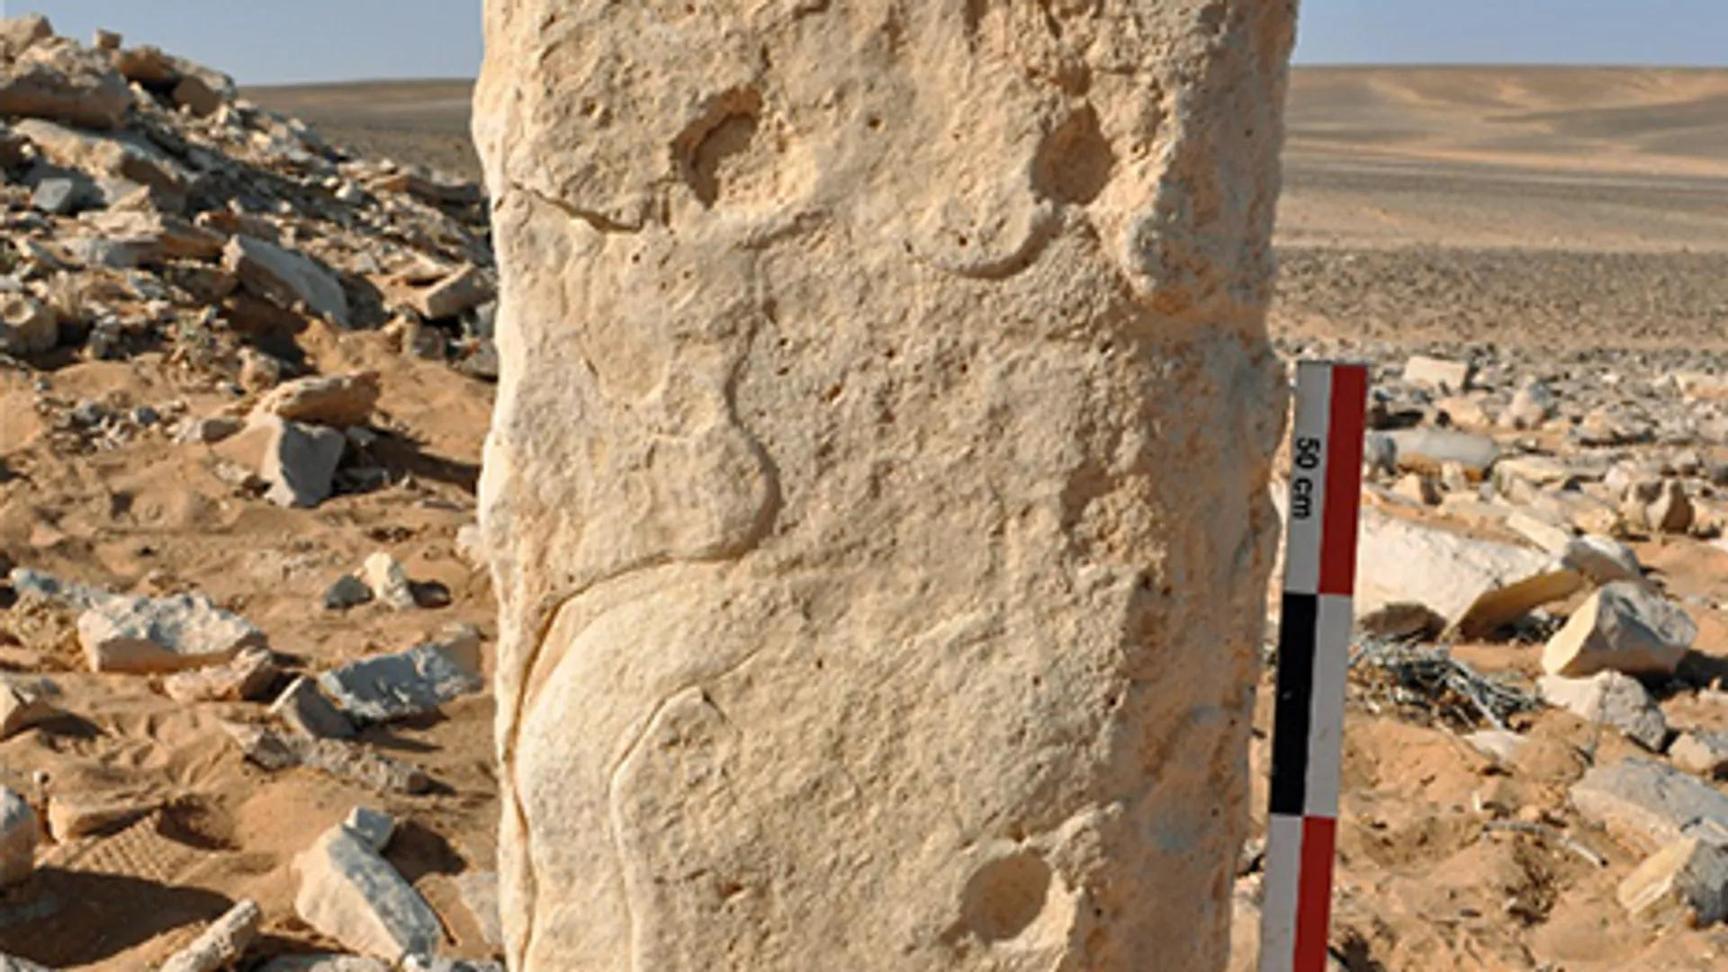 8,000-Year-Old Architectural Plans Discovered in Jordan & Saudi Arabia